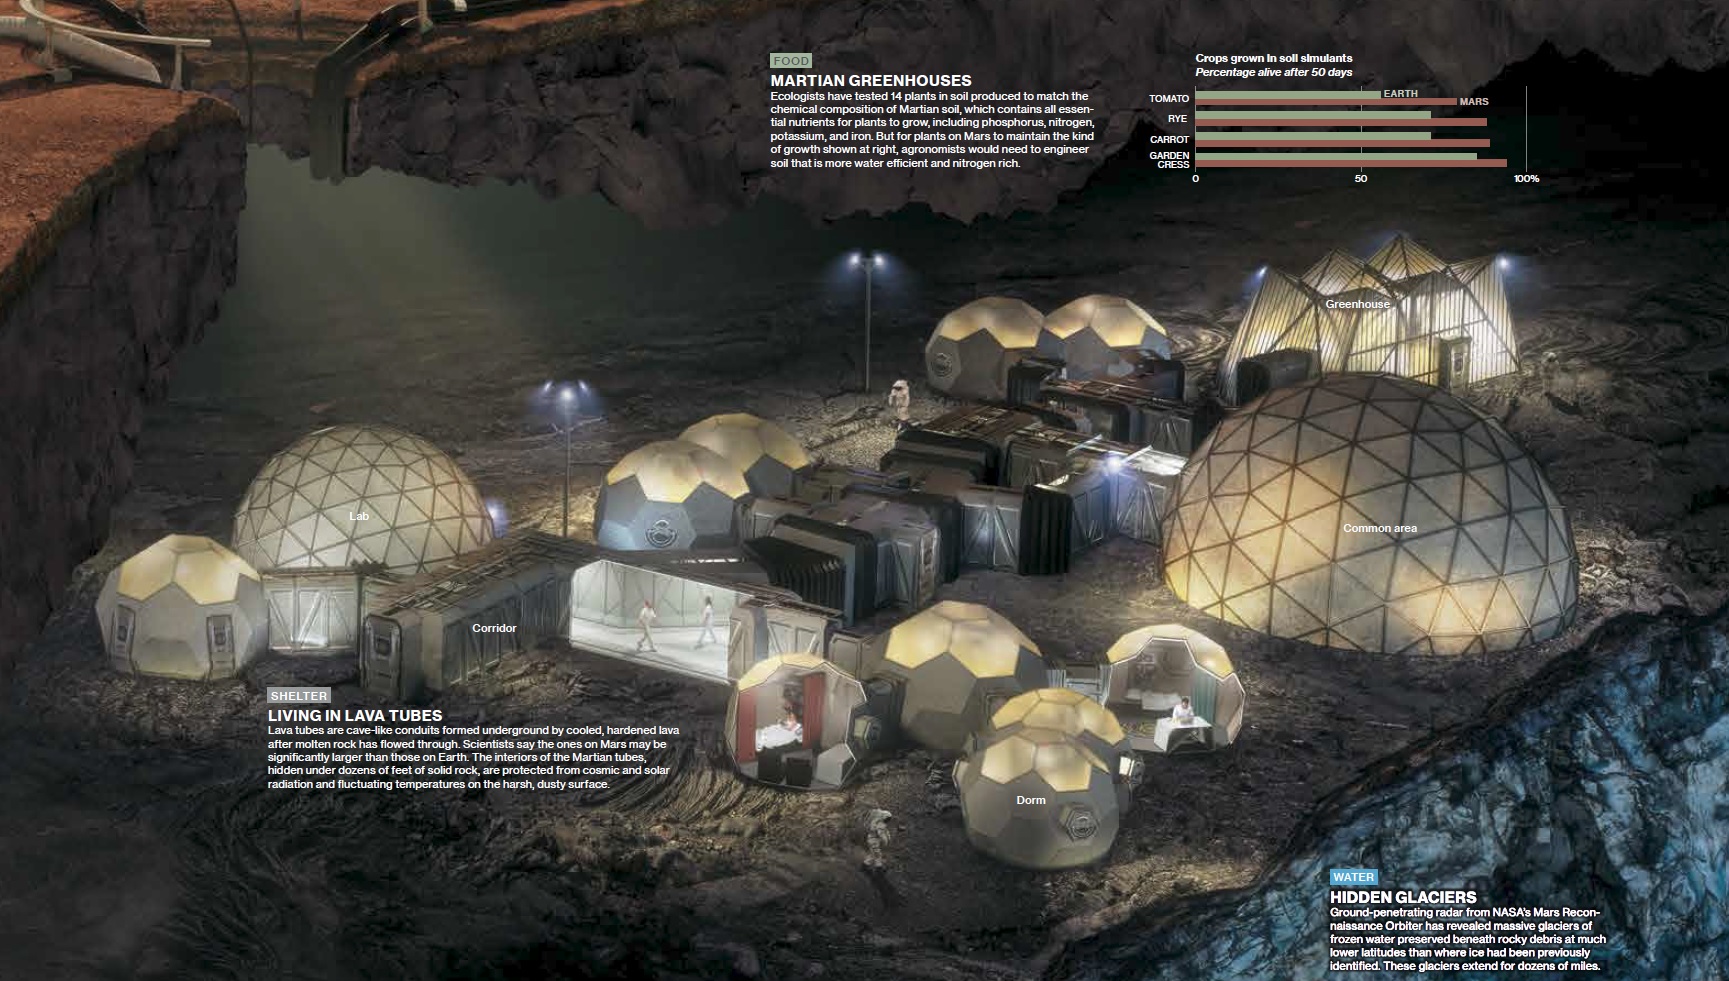 Underground Martian habitat (left) implemented with D2RP&O methods